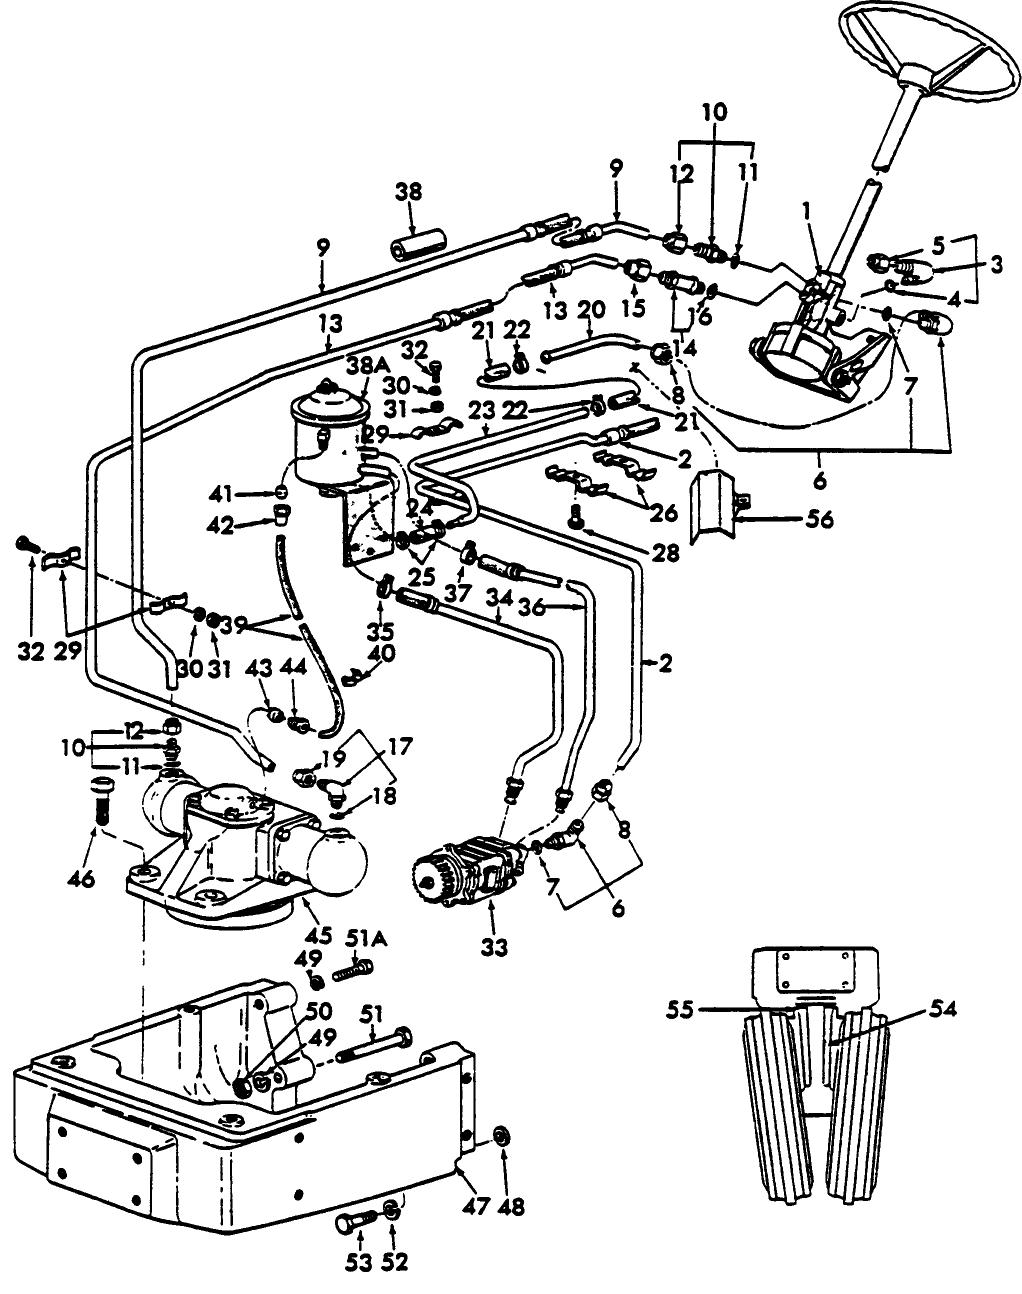 03A01 STEERING SYSTEM (68/2-73)